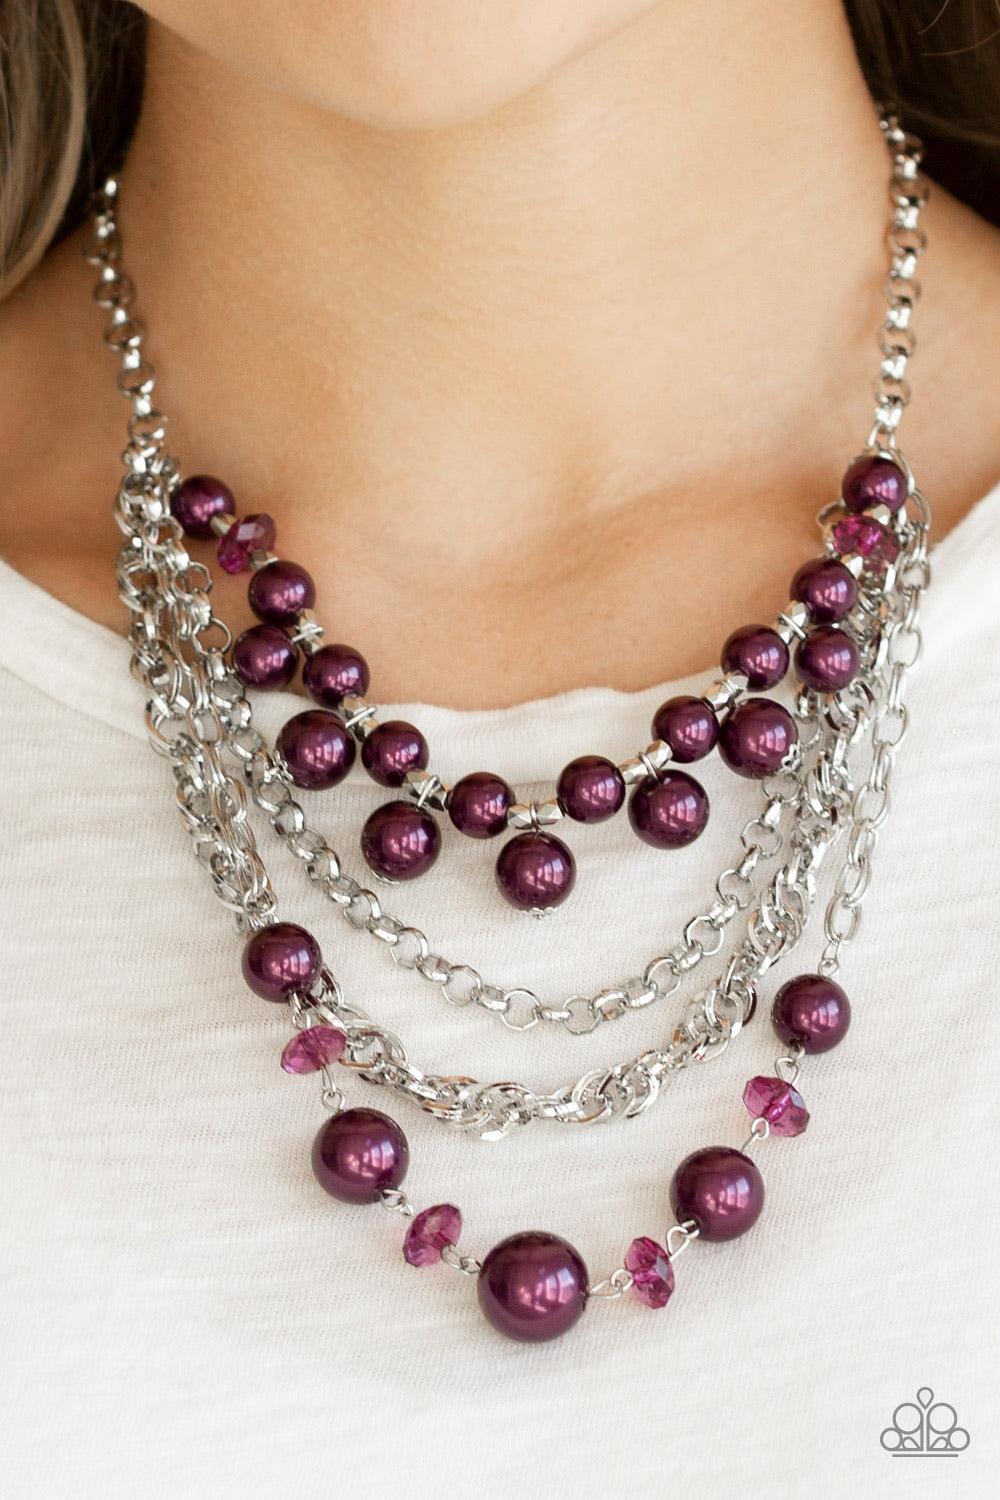 Paparazzi Accessories Rockin Rockette - Purple Varying in size, purple pearls, purple crystal-like beads, and faceted silver beads join with mismatched silver chains below the collar, creating a radically refined fringe. Features an adjustable clasp closu